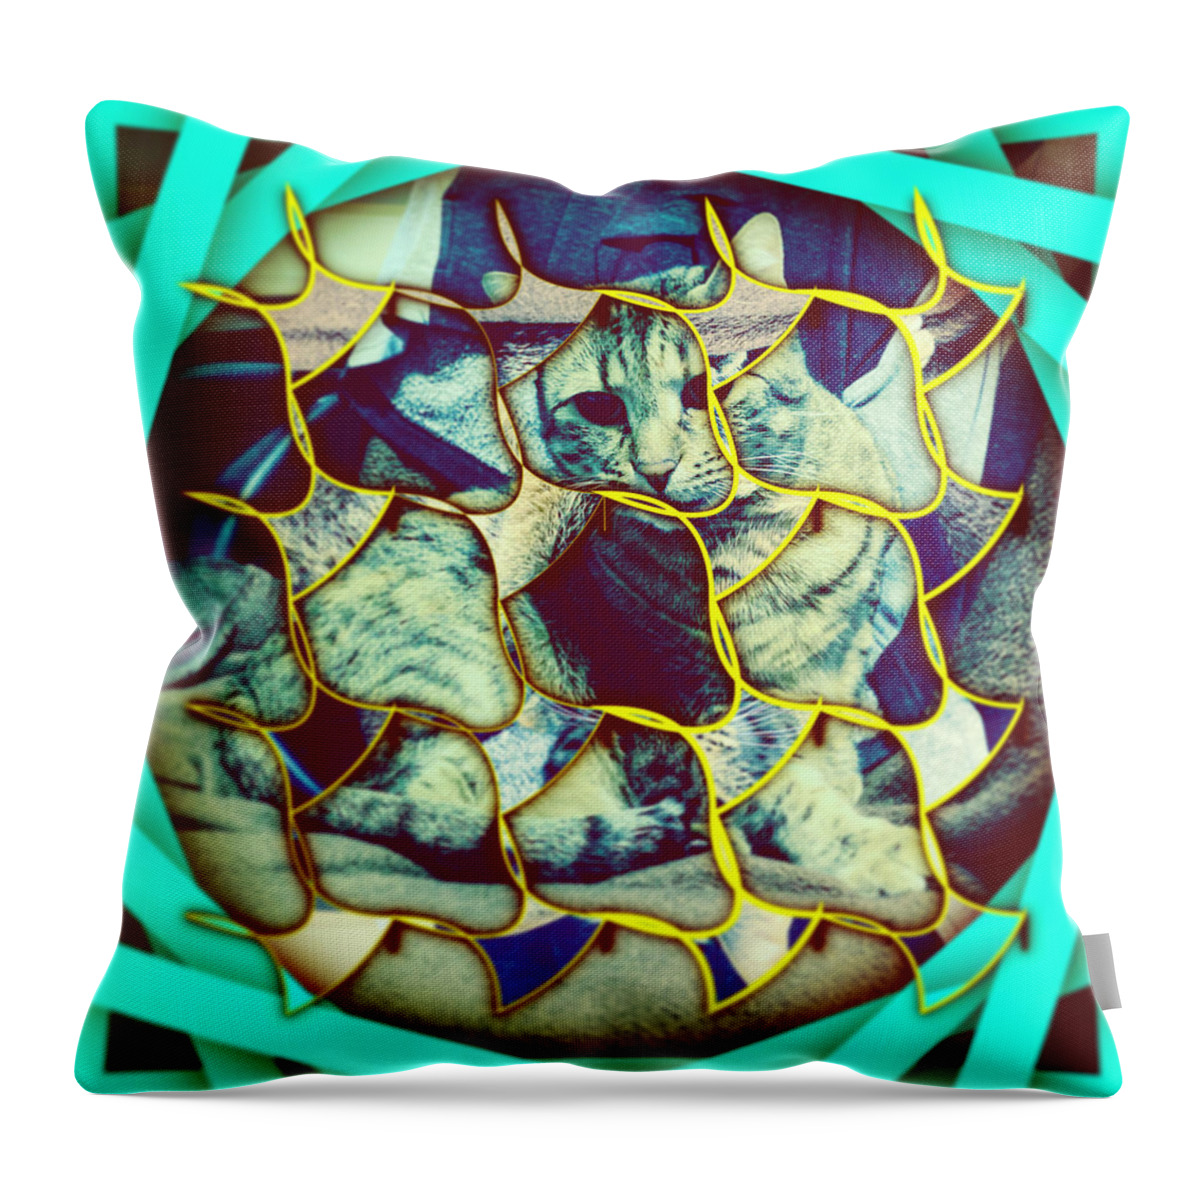 Abstract Throw Pillow featuring the digital art Cat 2 by Marko Sabotin